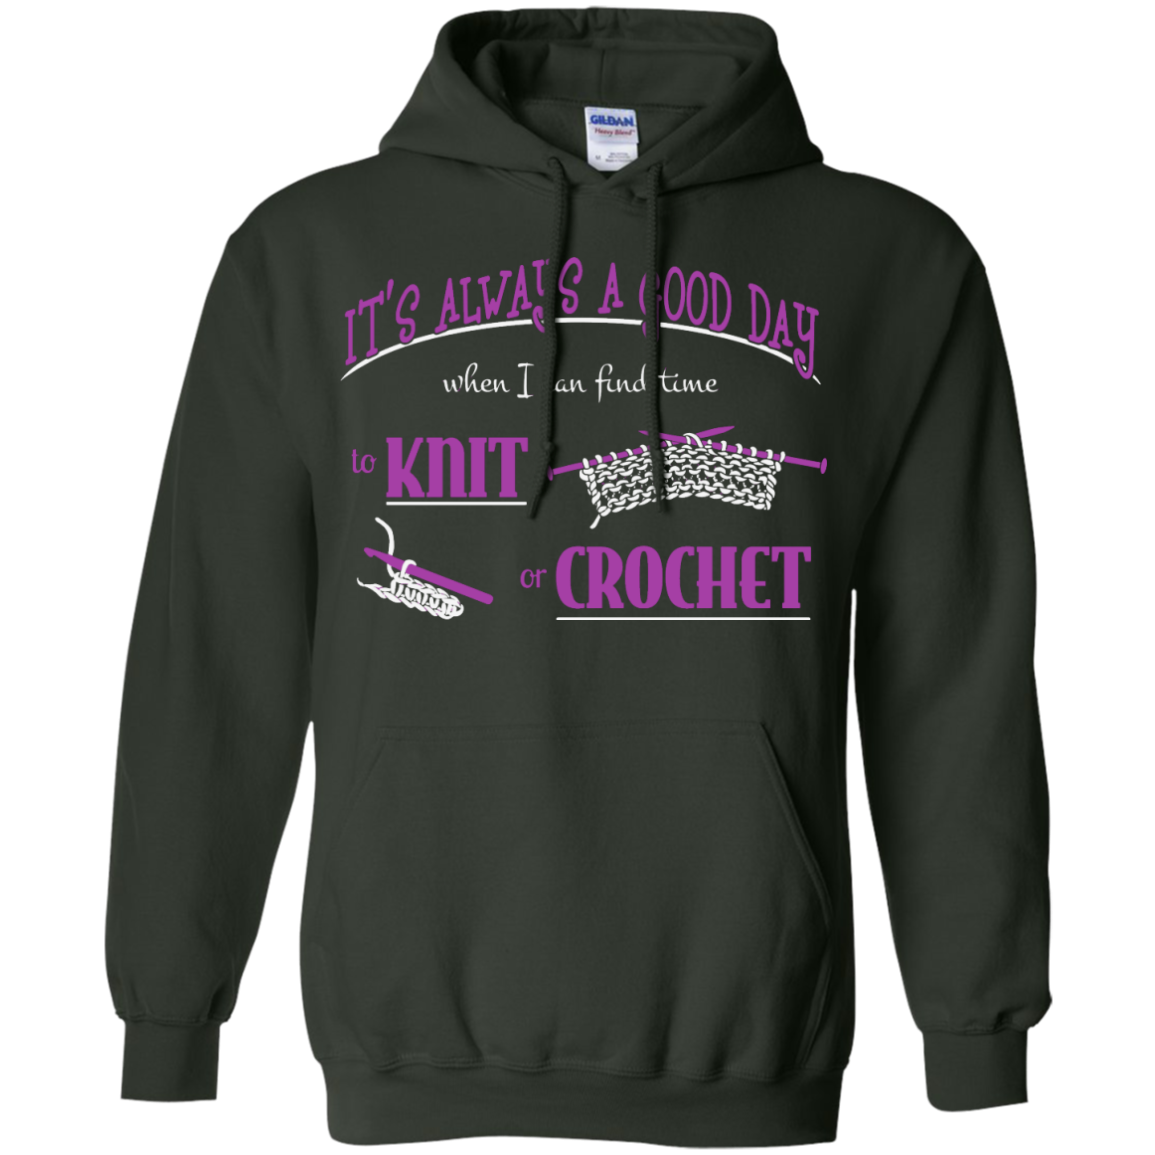 Good Day to Knit or Crochet Hoodies - Crafter4Life - 3